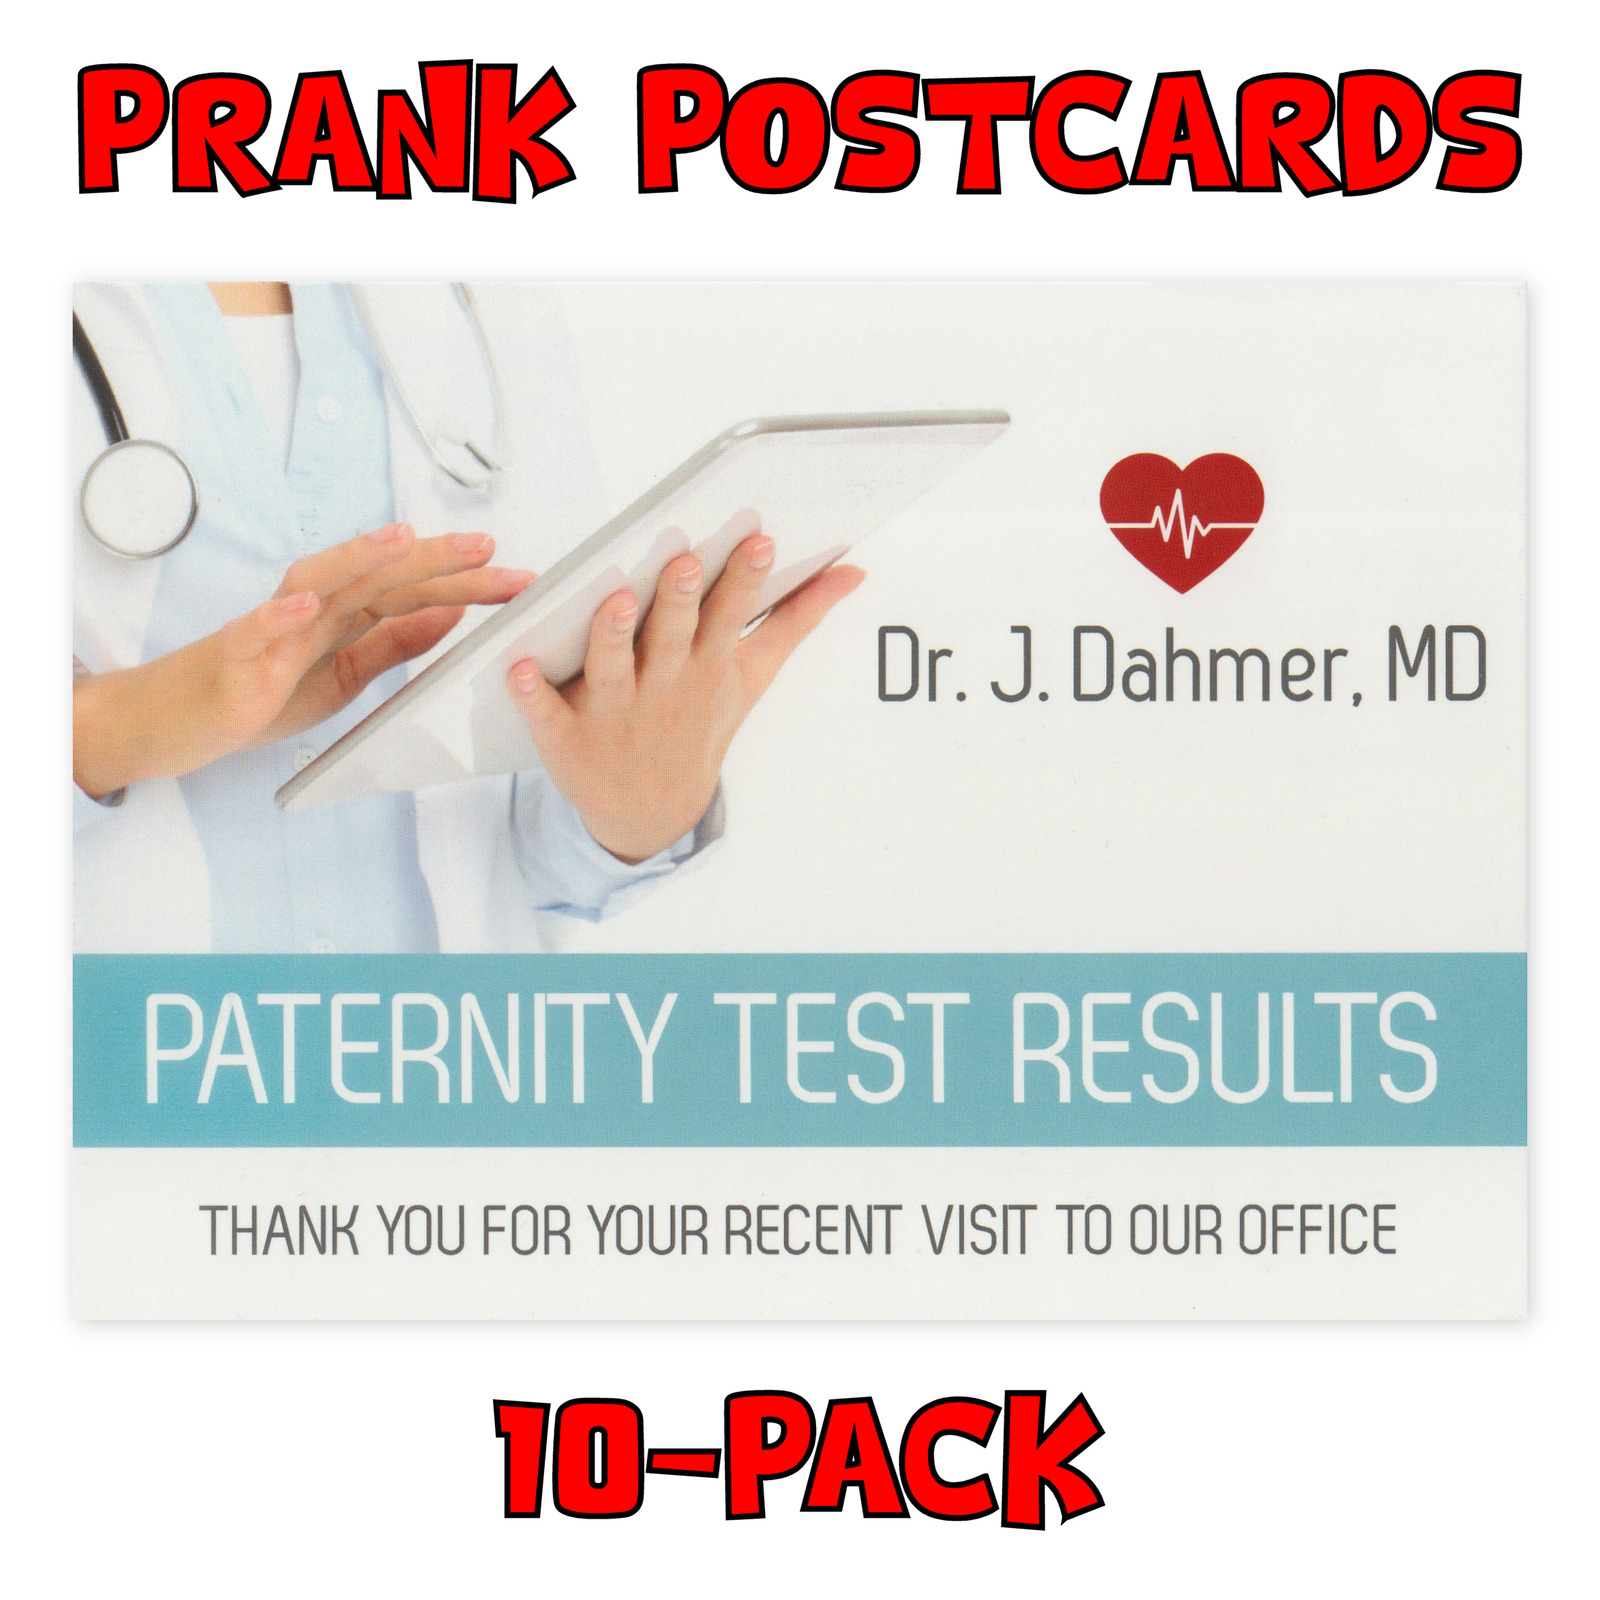 10-Pack Prank Postcards - Paternity Test Results - Send Them To Victims Yourself